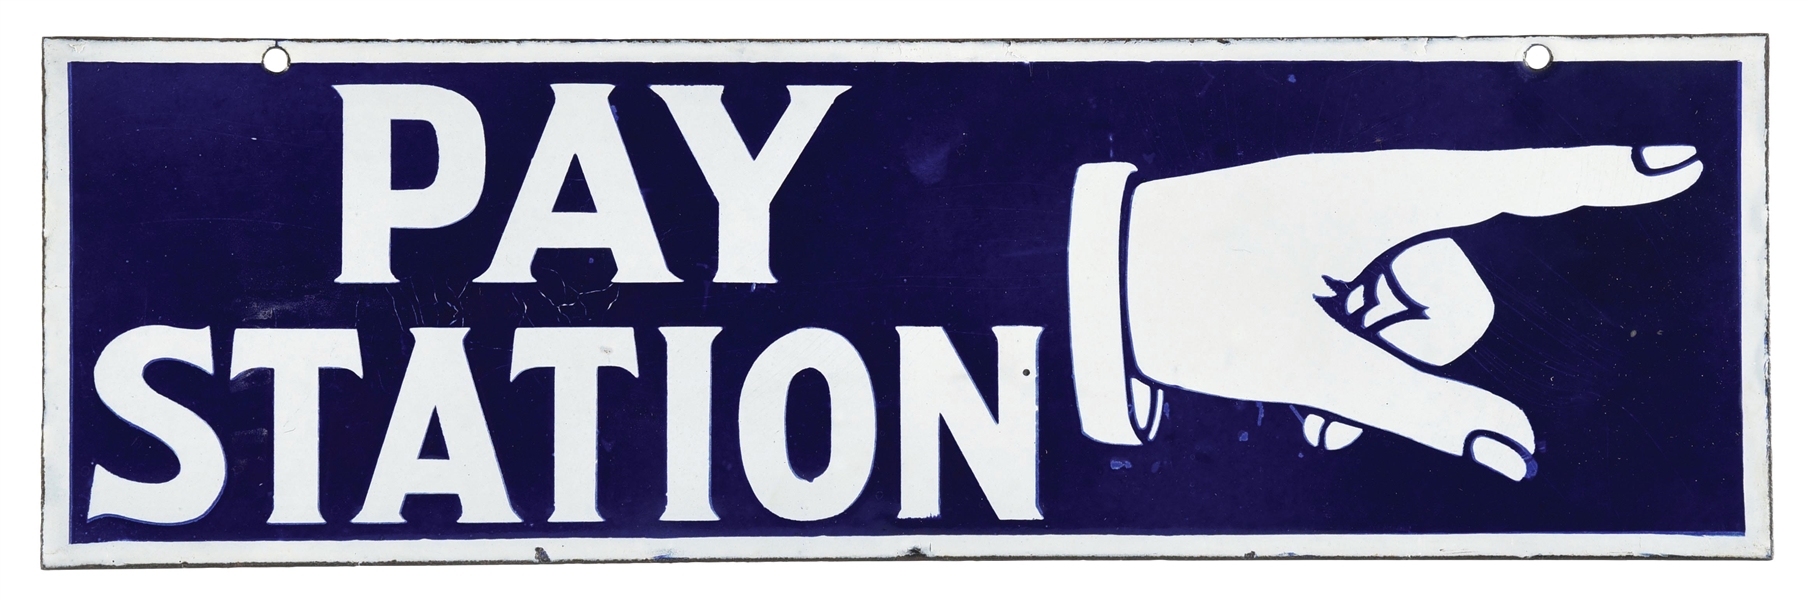 PAY STATION PORCELAIN SIGN W/ POINTING FINGER GRAPHIC. 